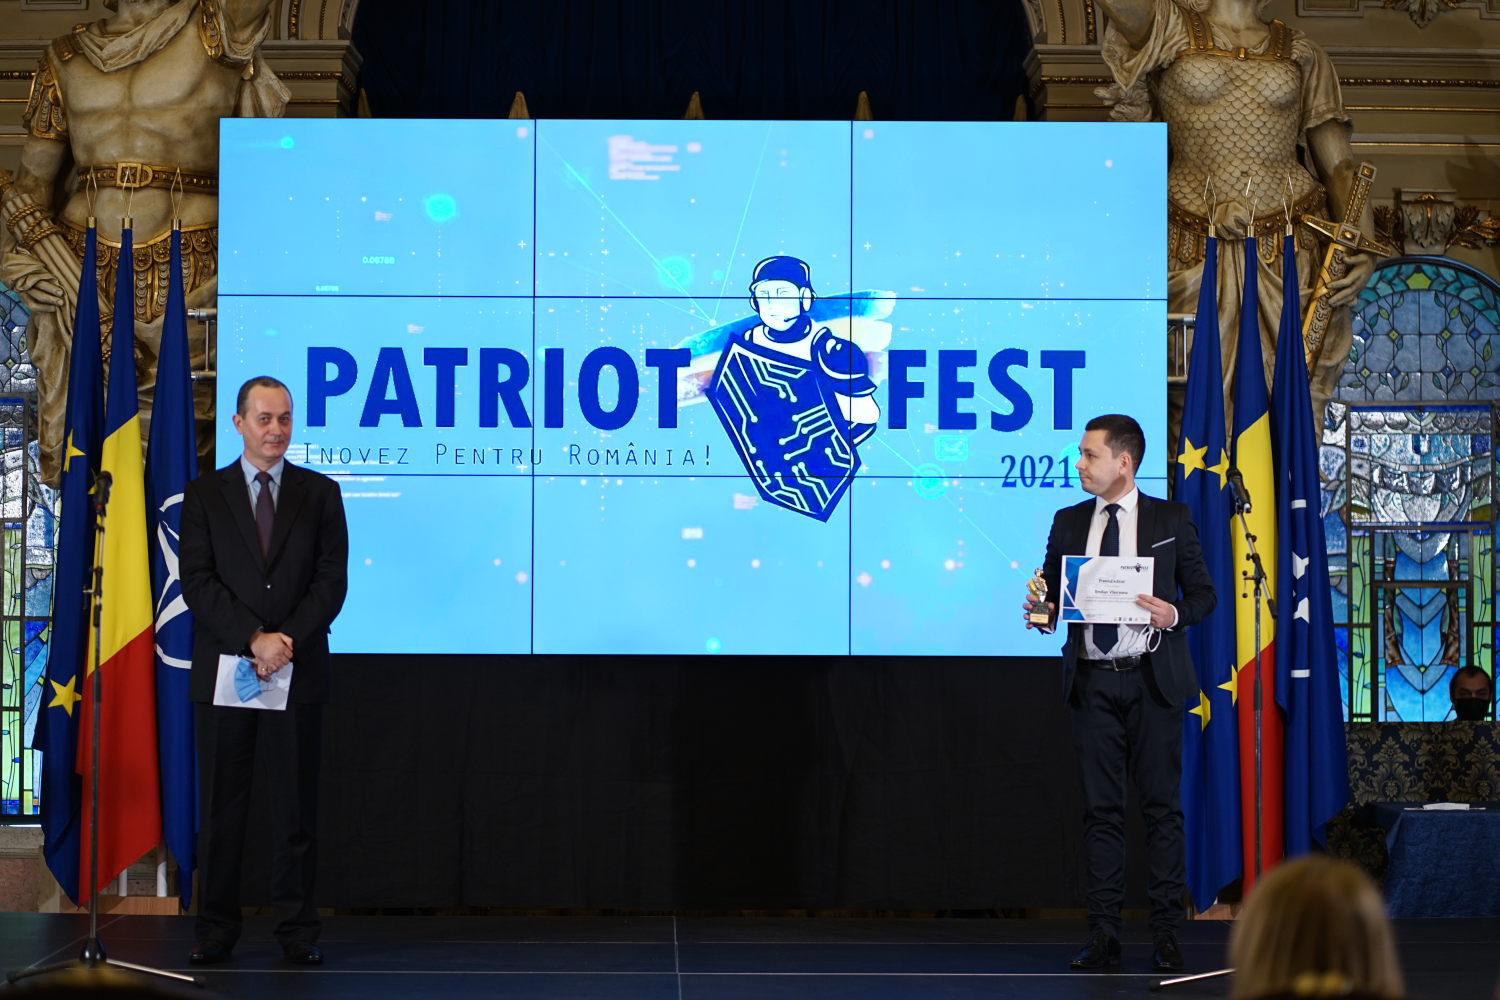 The Gala of the fourth edition of the national PatriotFest competition has announced its winners